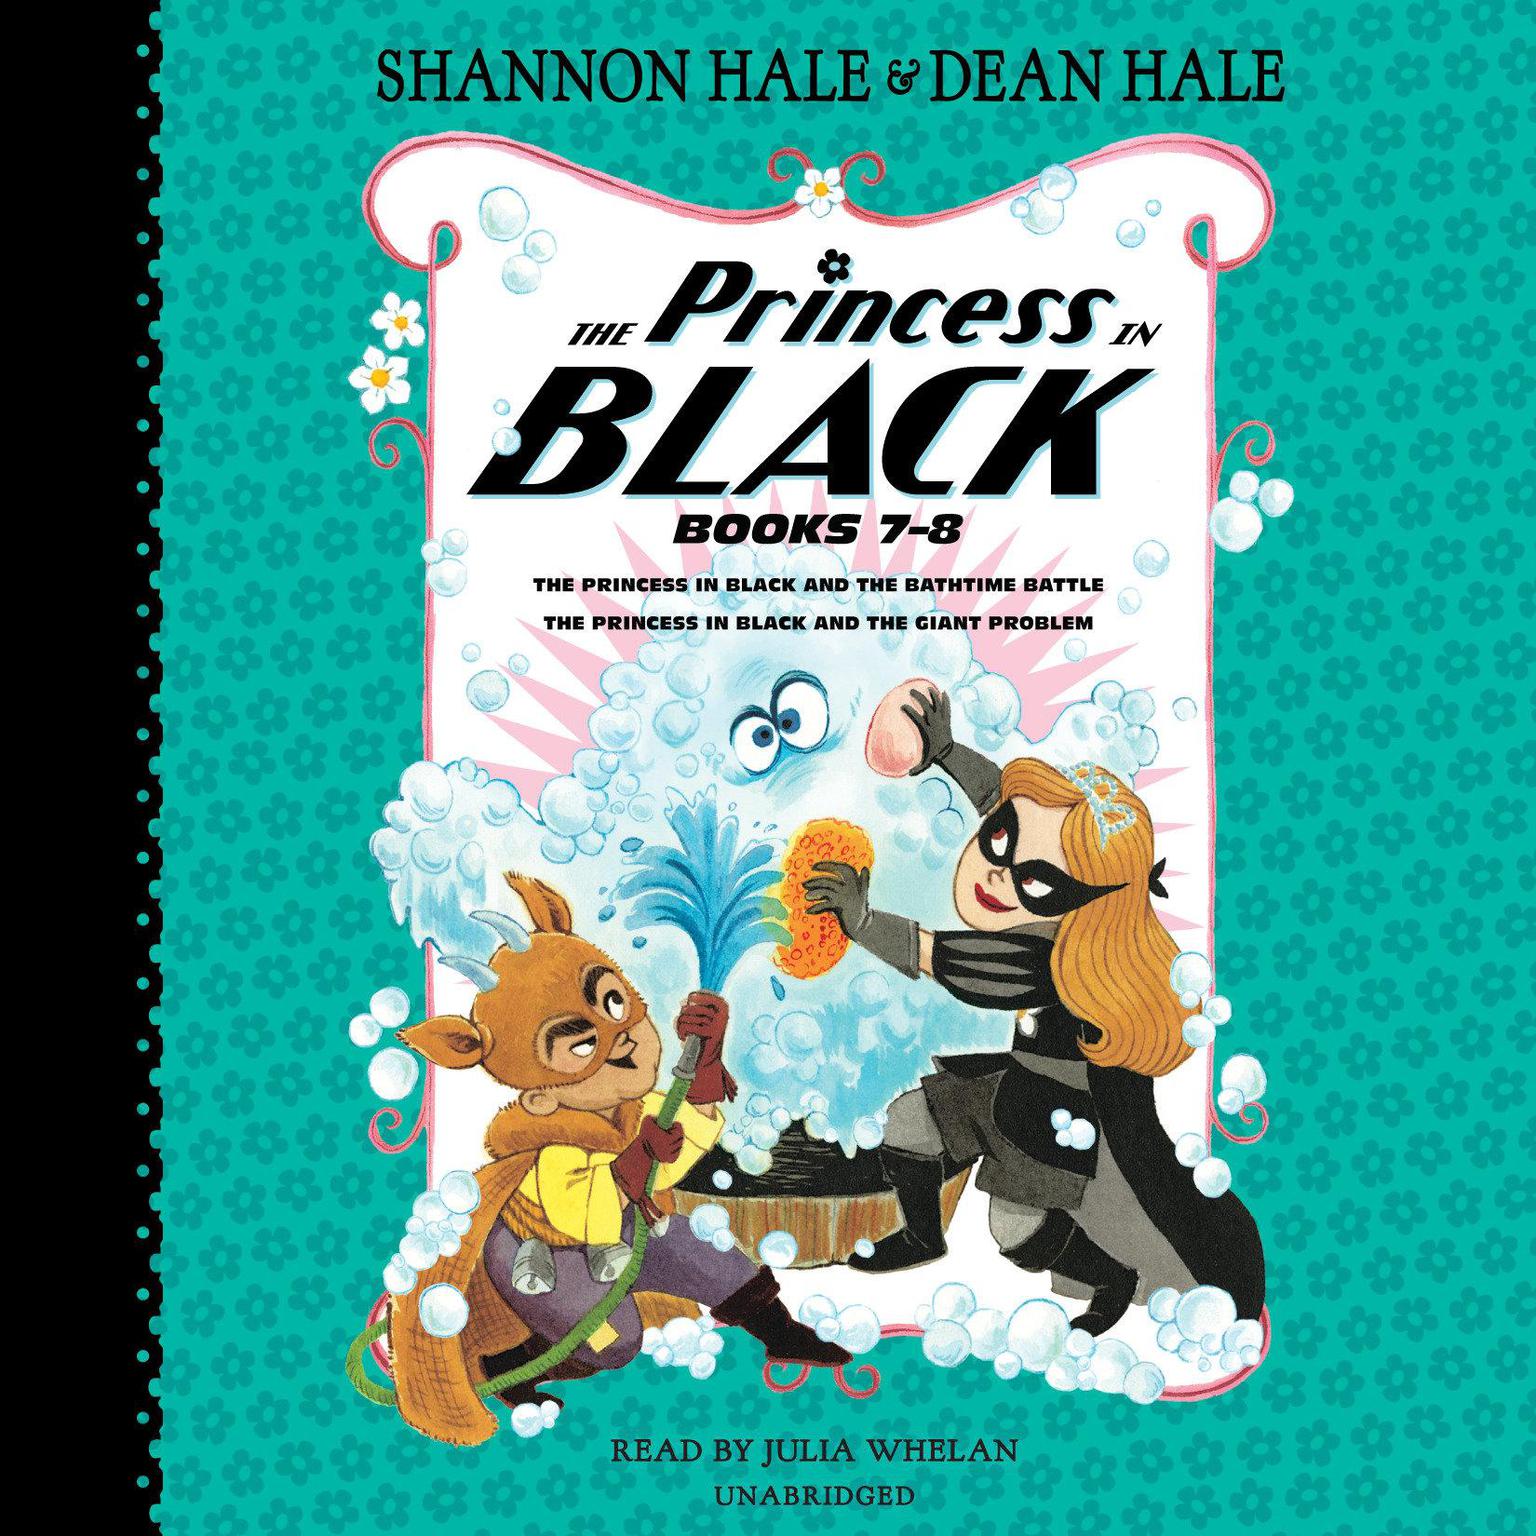 The Princess in Black, Books 7-8: The Princess in Black and the Bathtime Battle; The Princess in Black and the Giant Problem Audiobook, by Shannon Hale